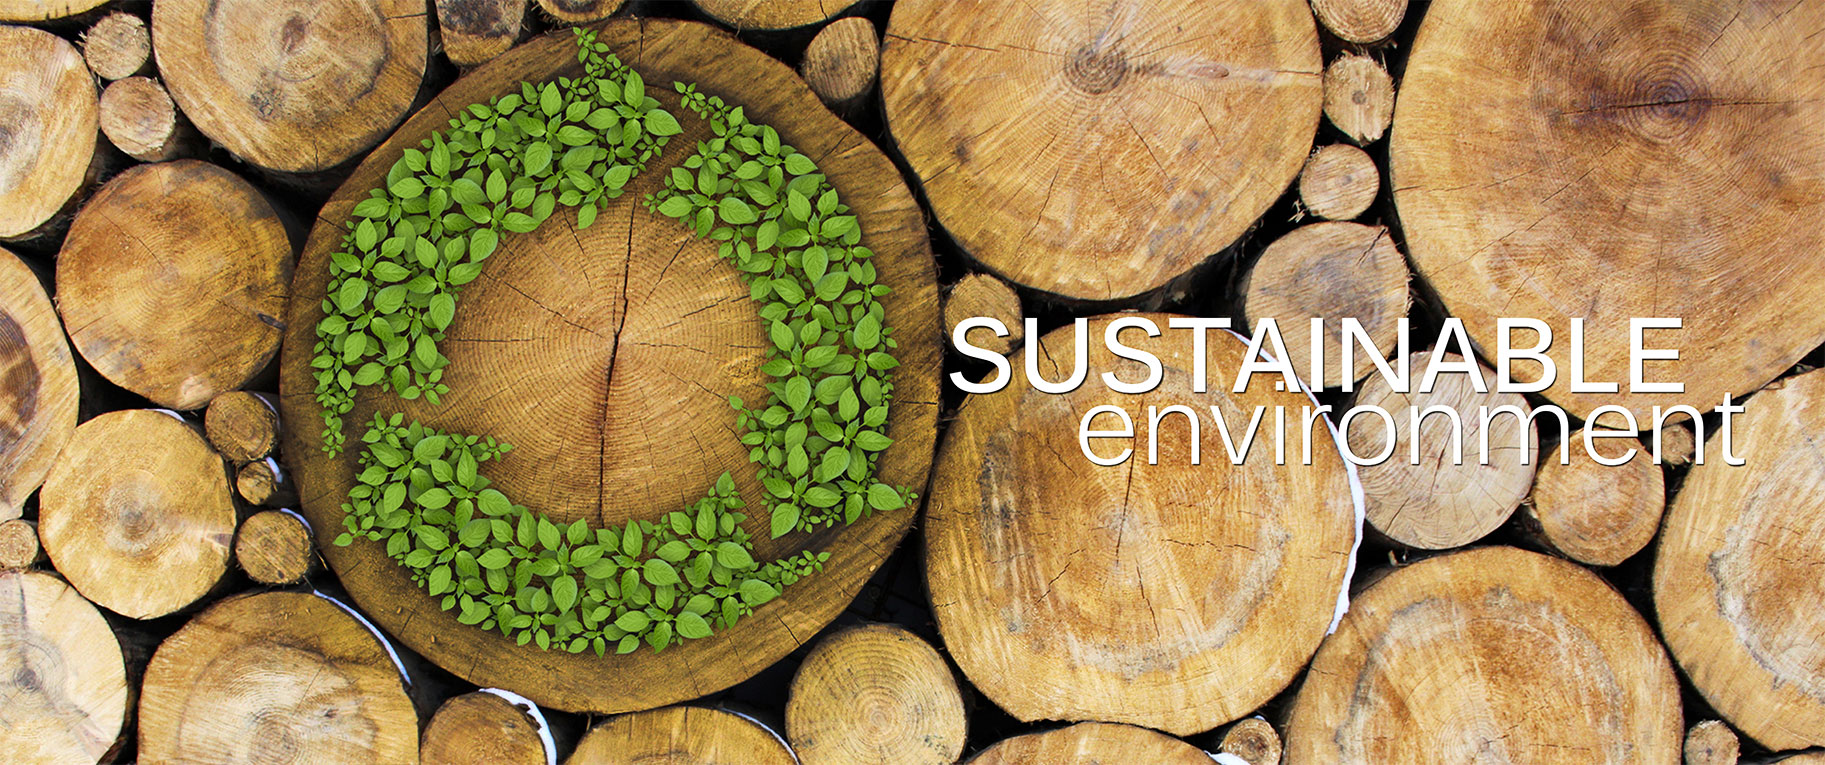 SUSTAINABLE-ENVIRONMENT